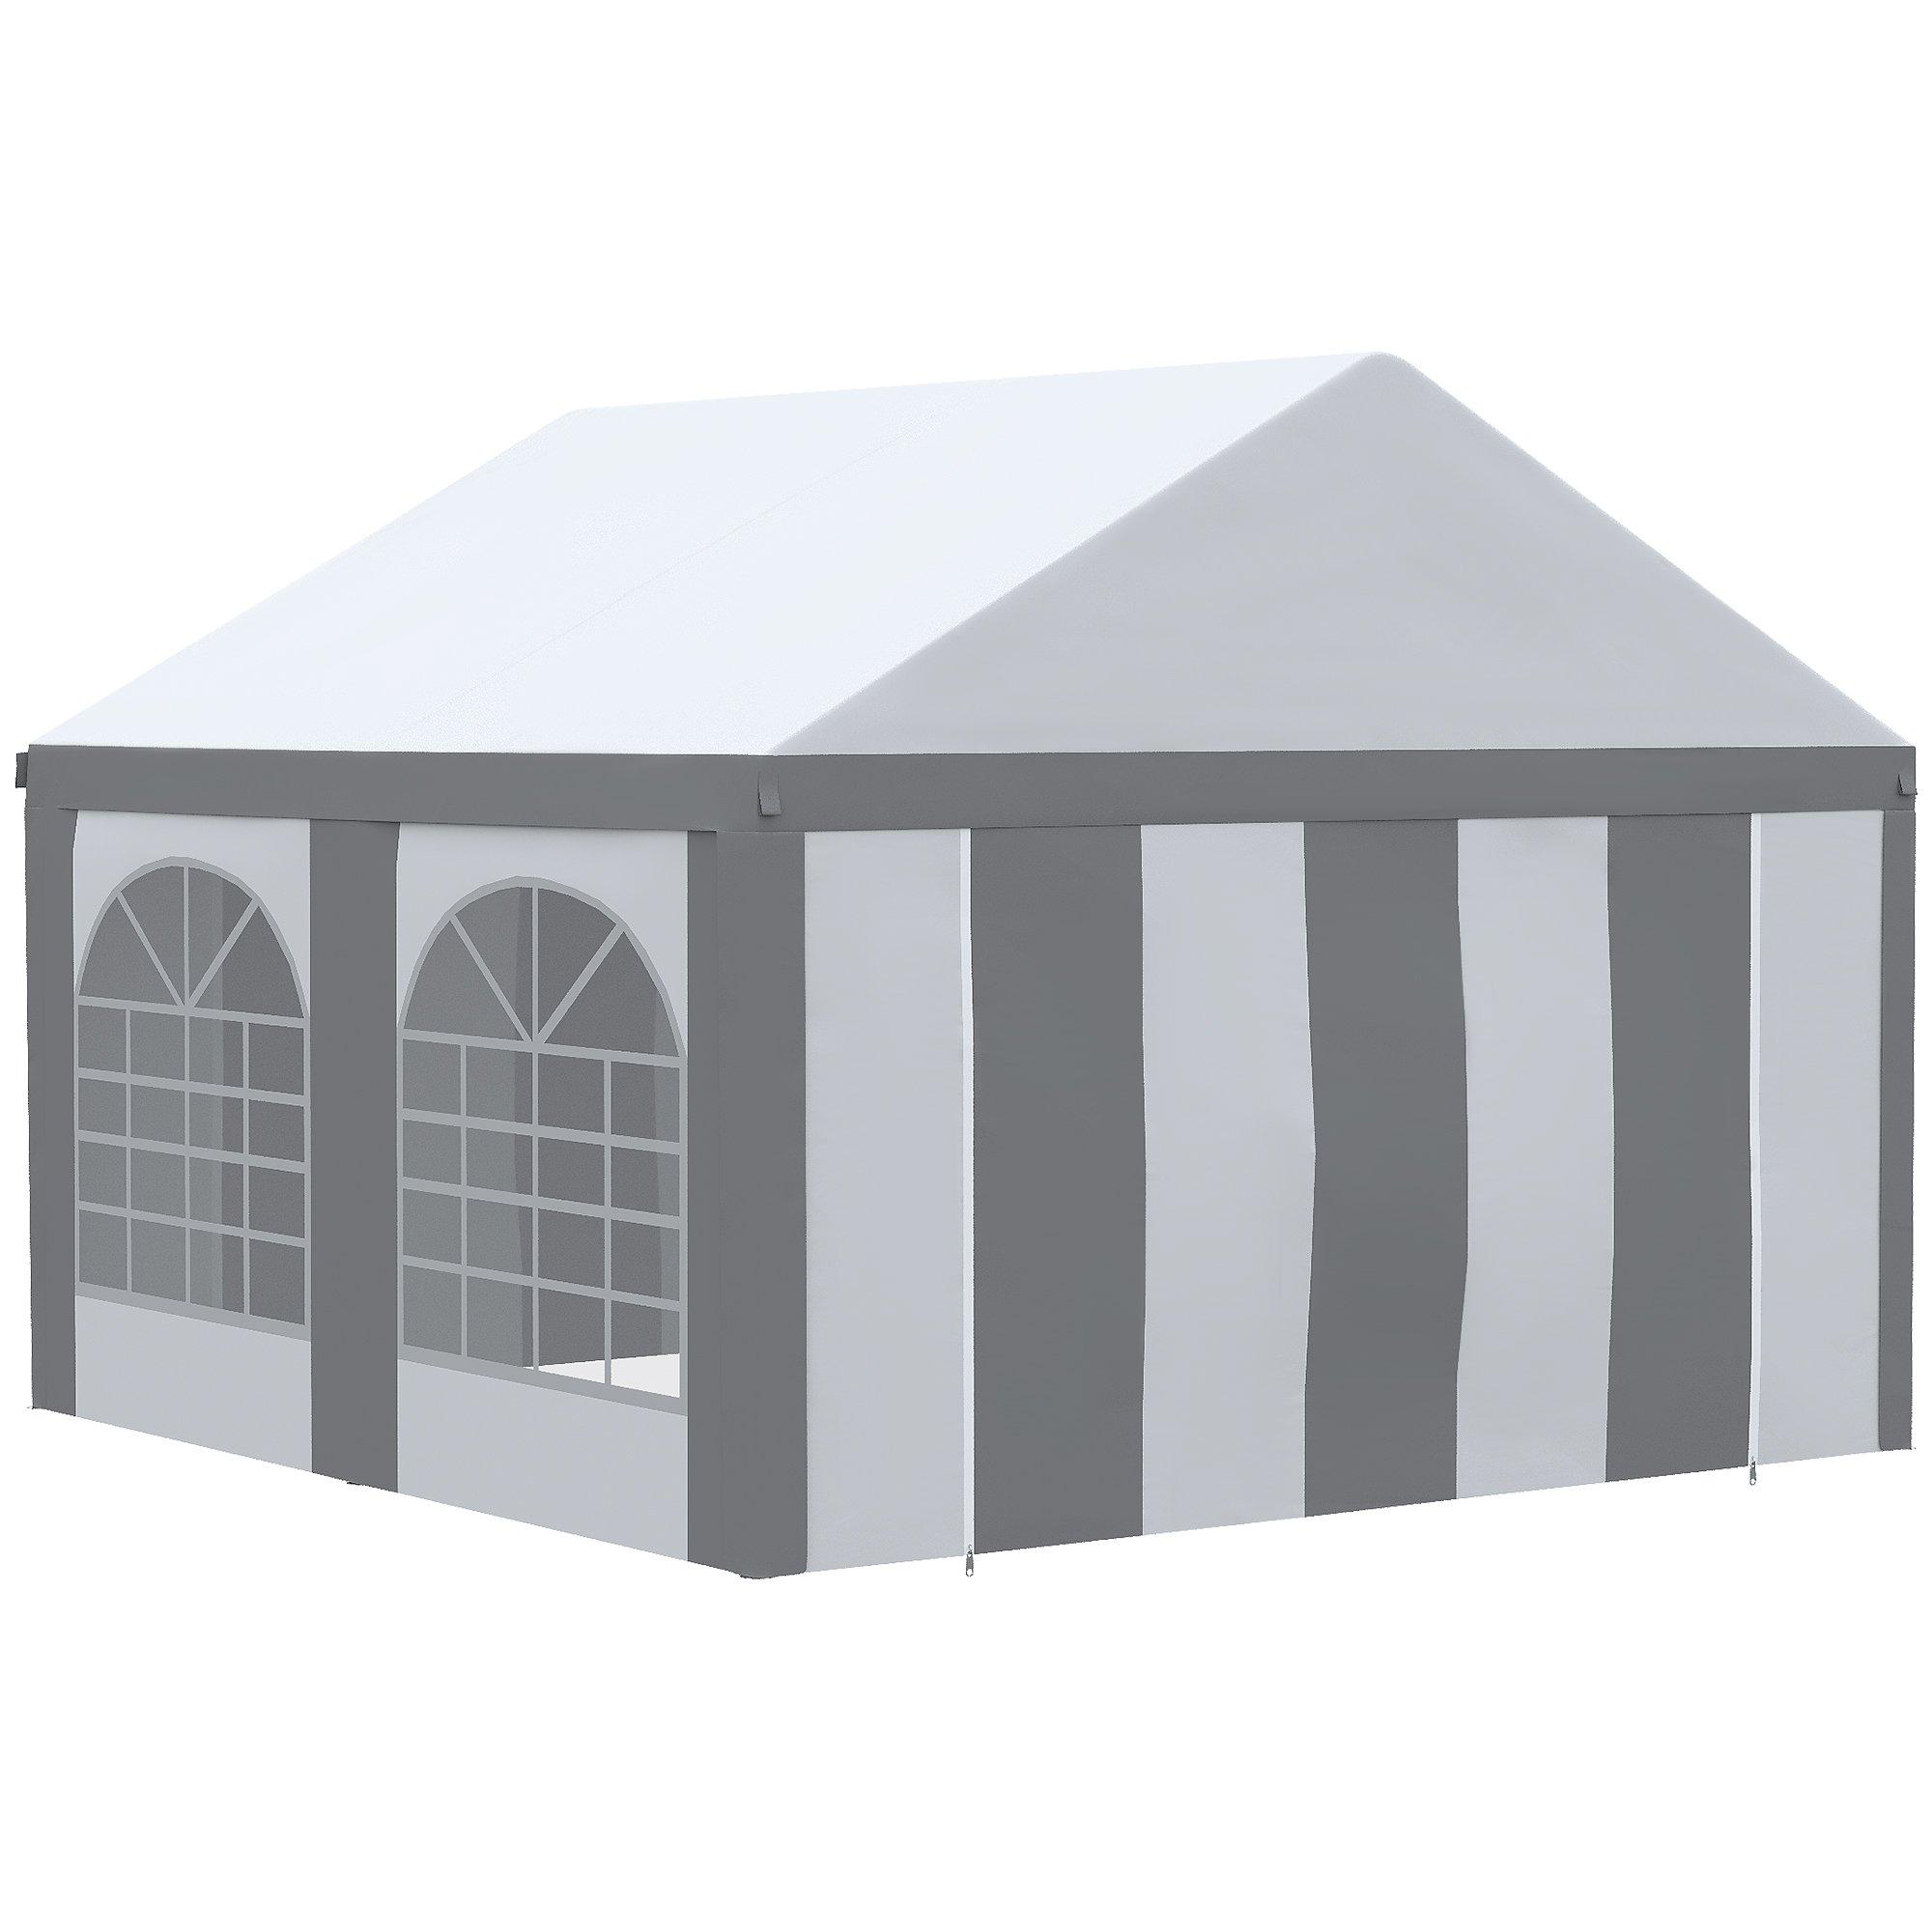 4 x 4m Party Tent, Marquee Gazebo with Sides, Windows, Double Doors